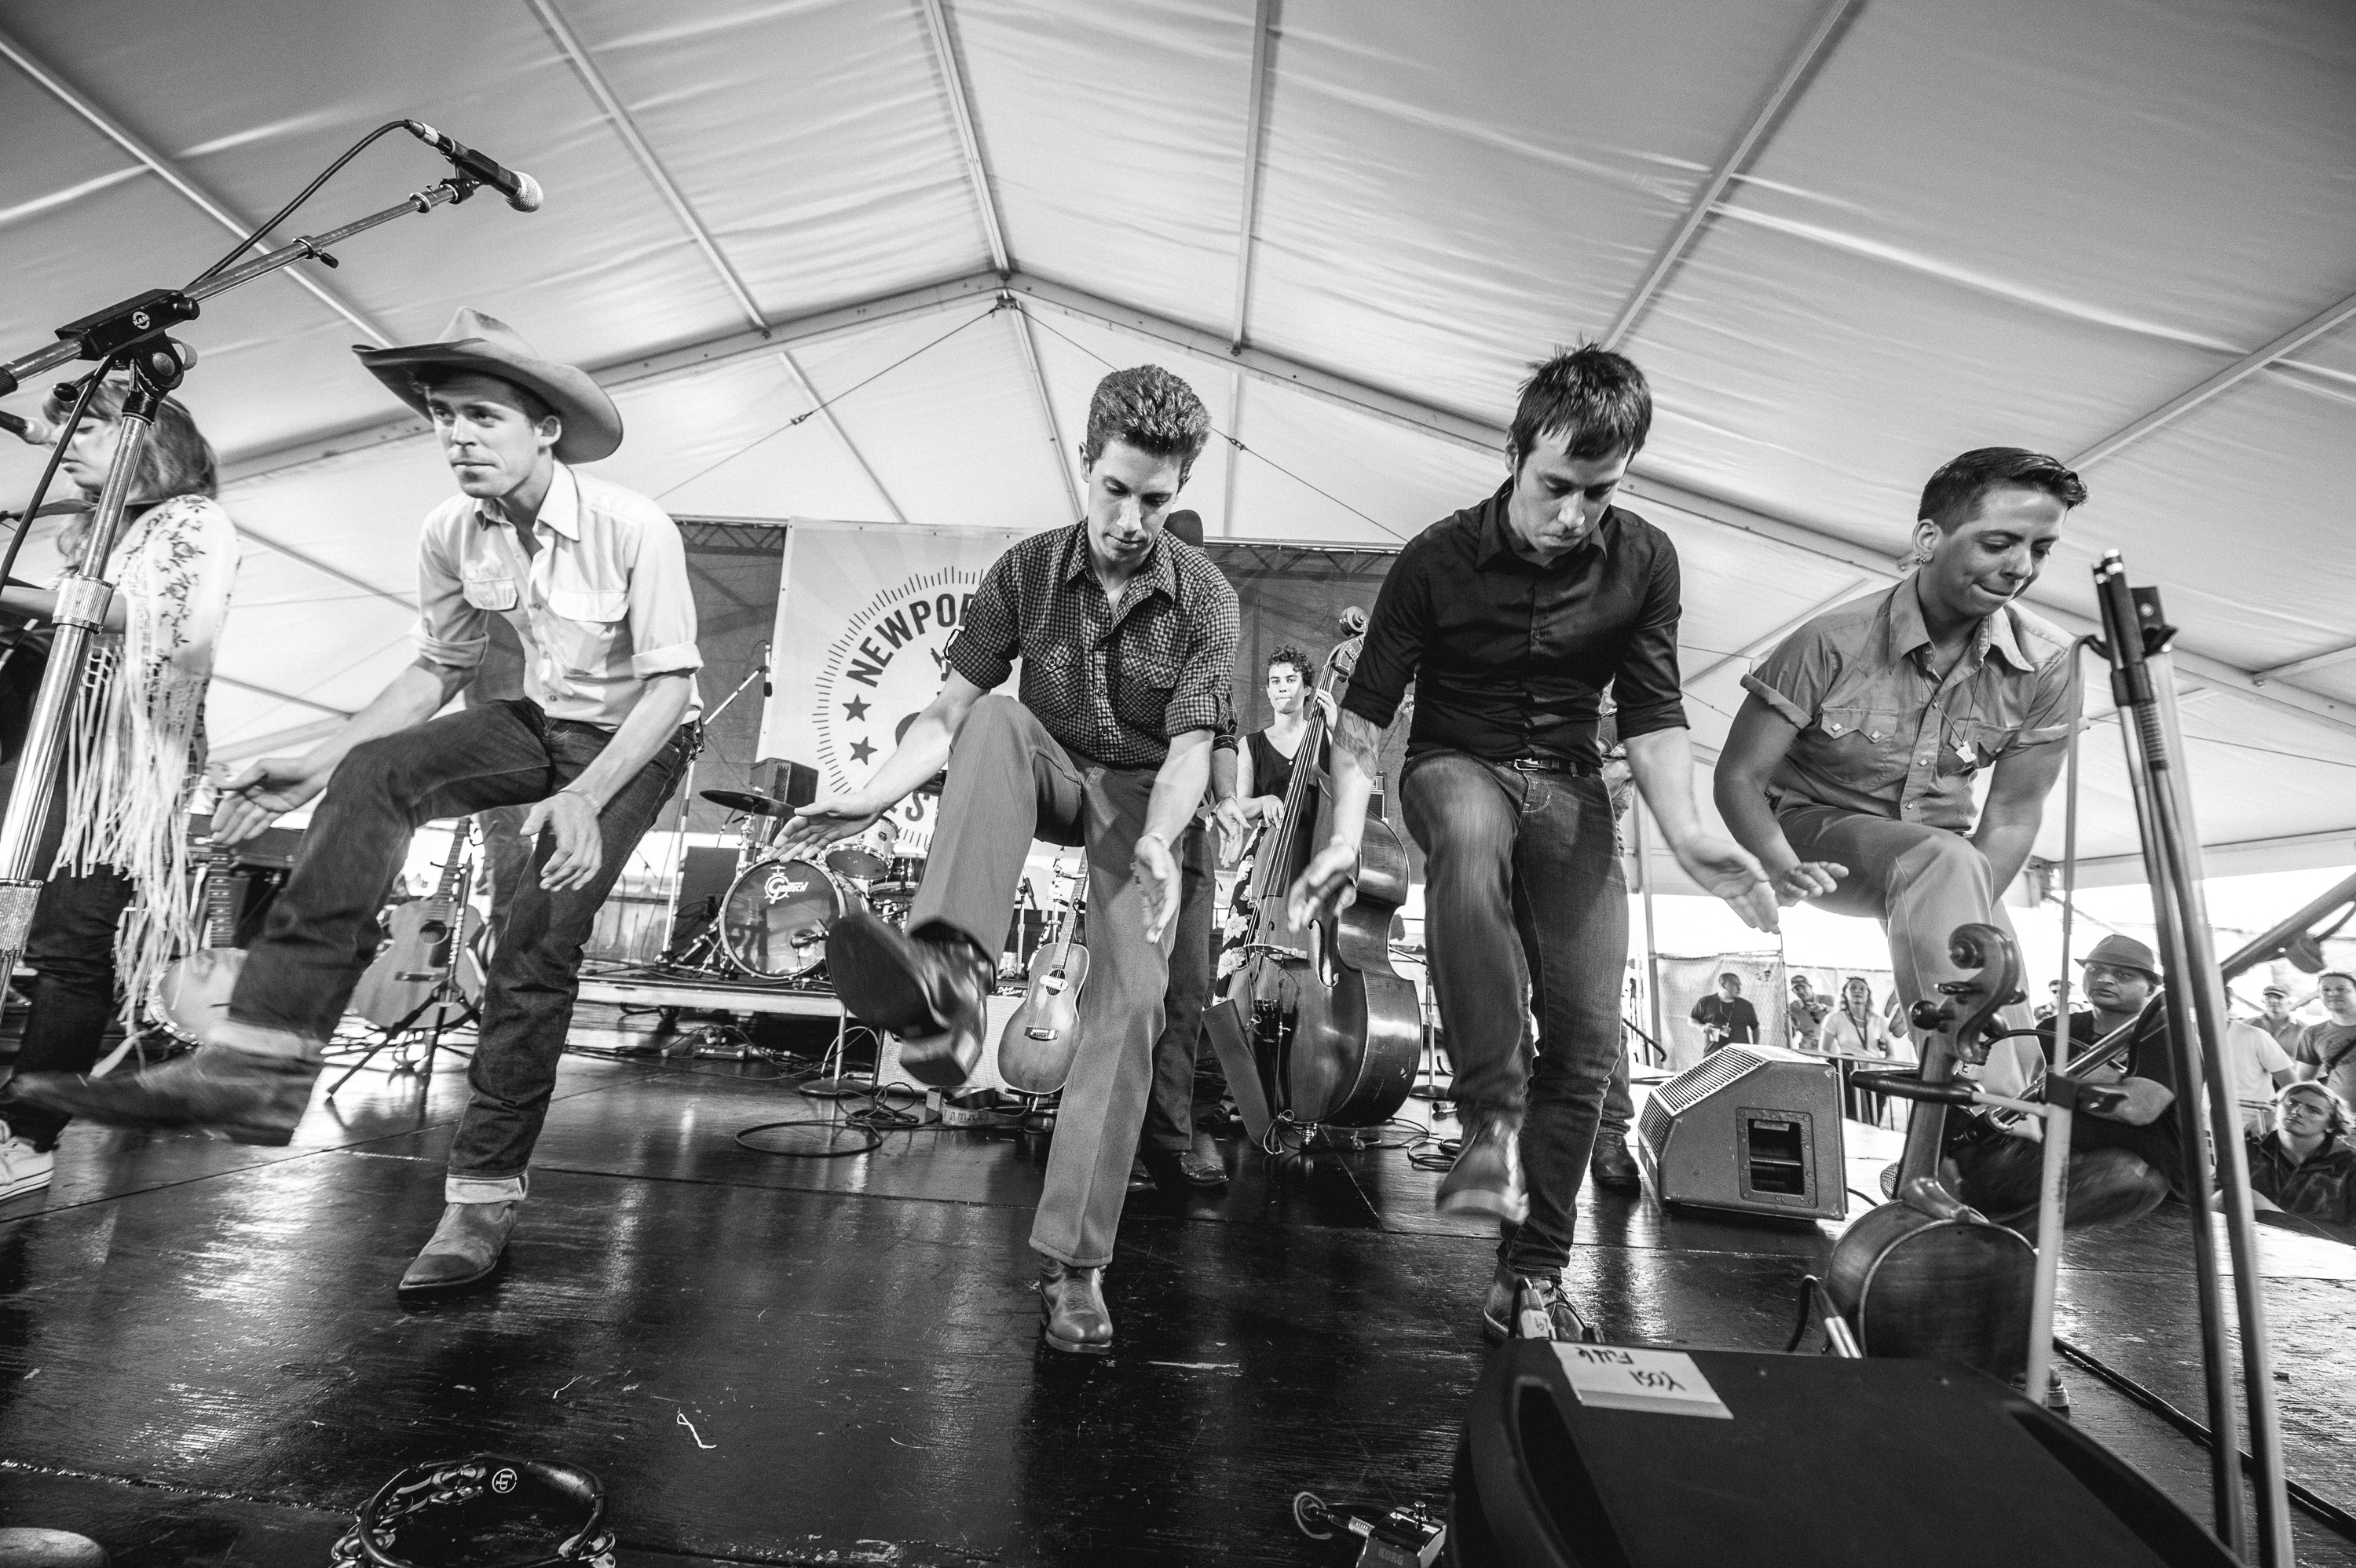 Hurray for the Riff Raff performs at the 2014 Newport Folk Festival